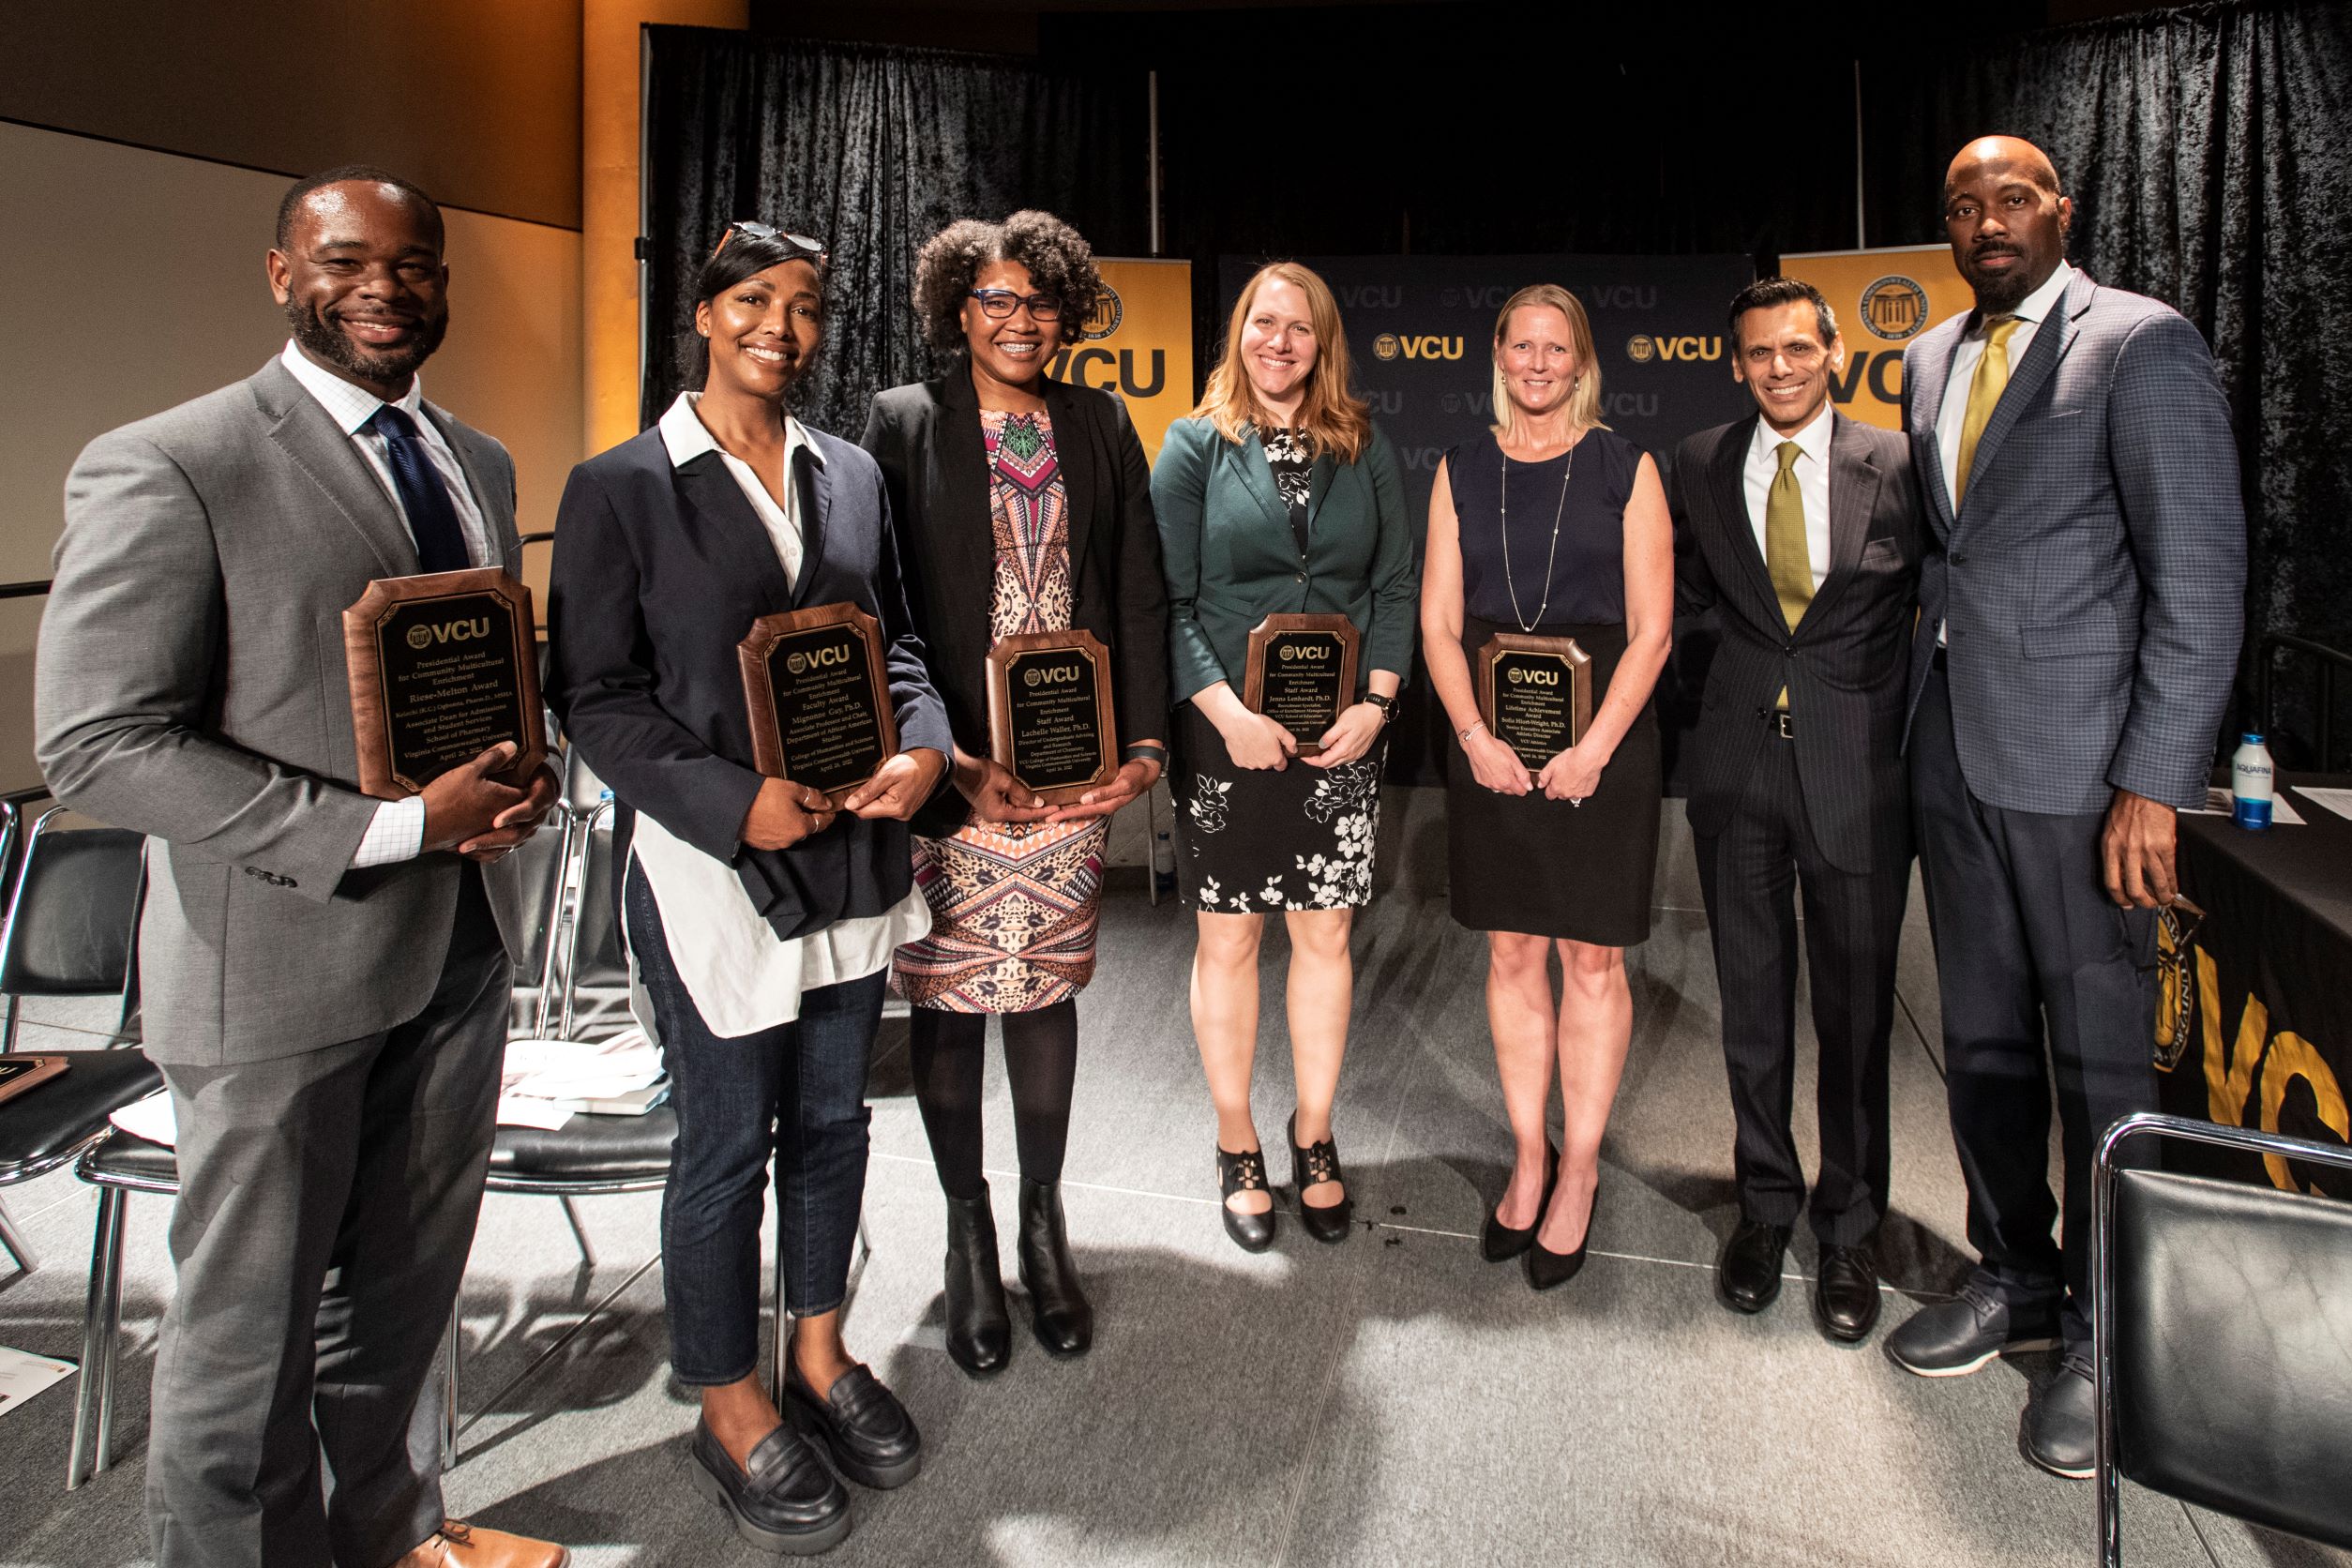 2022 PACME recipients pose with their awards. To the right are VCU president Michael Rao and IES VP Aashir Nasim.